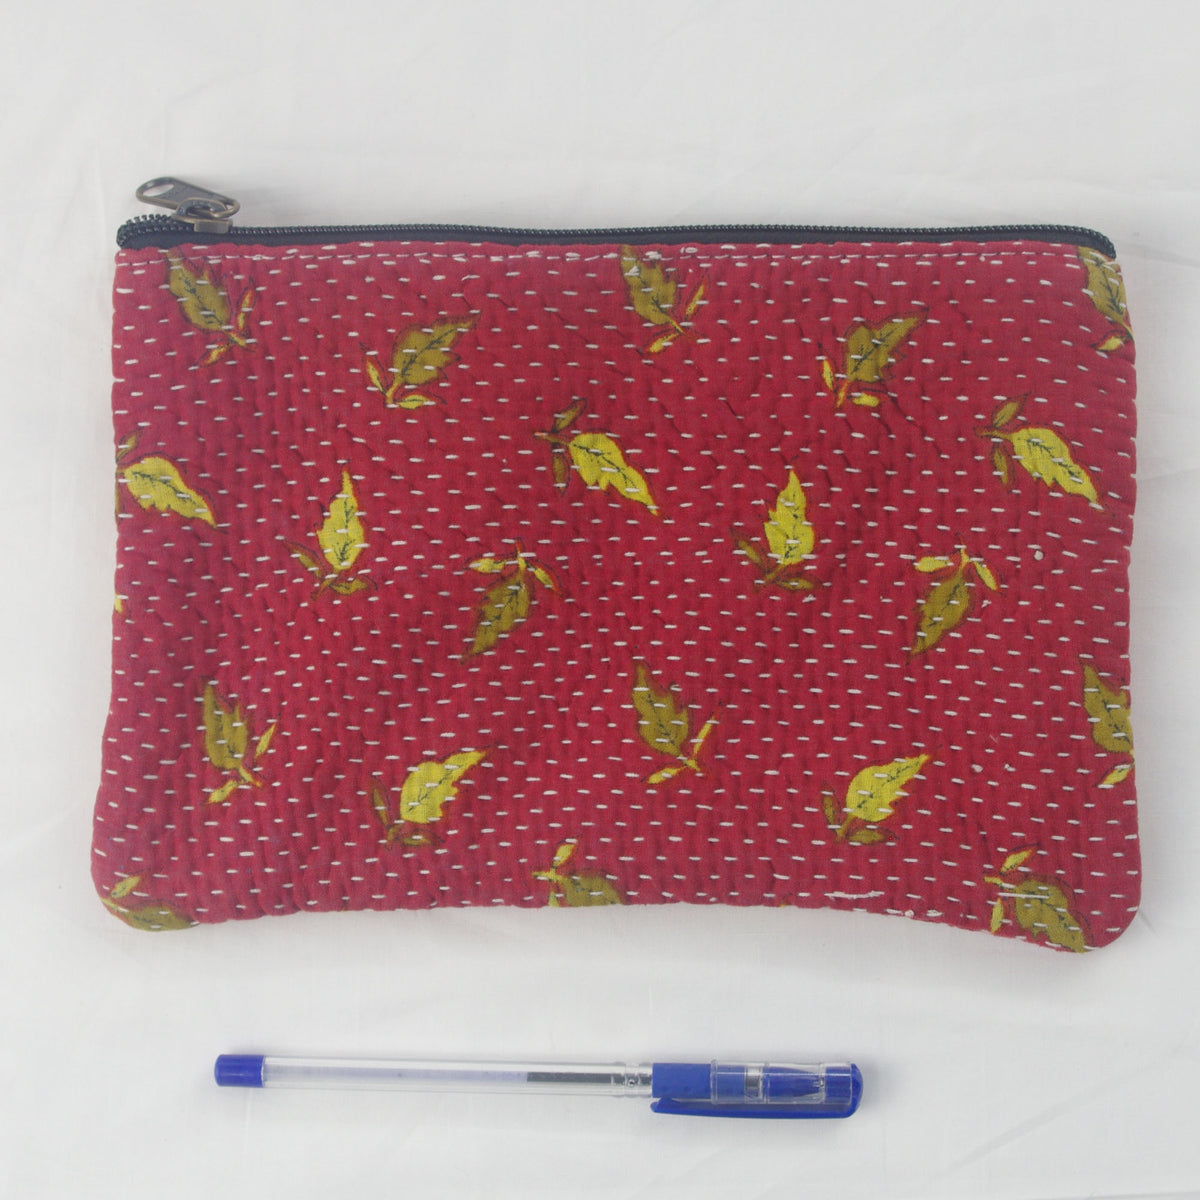 Vintage Kantha Pouch, Cosmetic Bag - Red Yellow Leaves